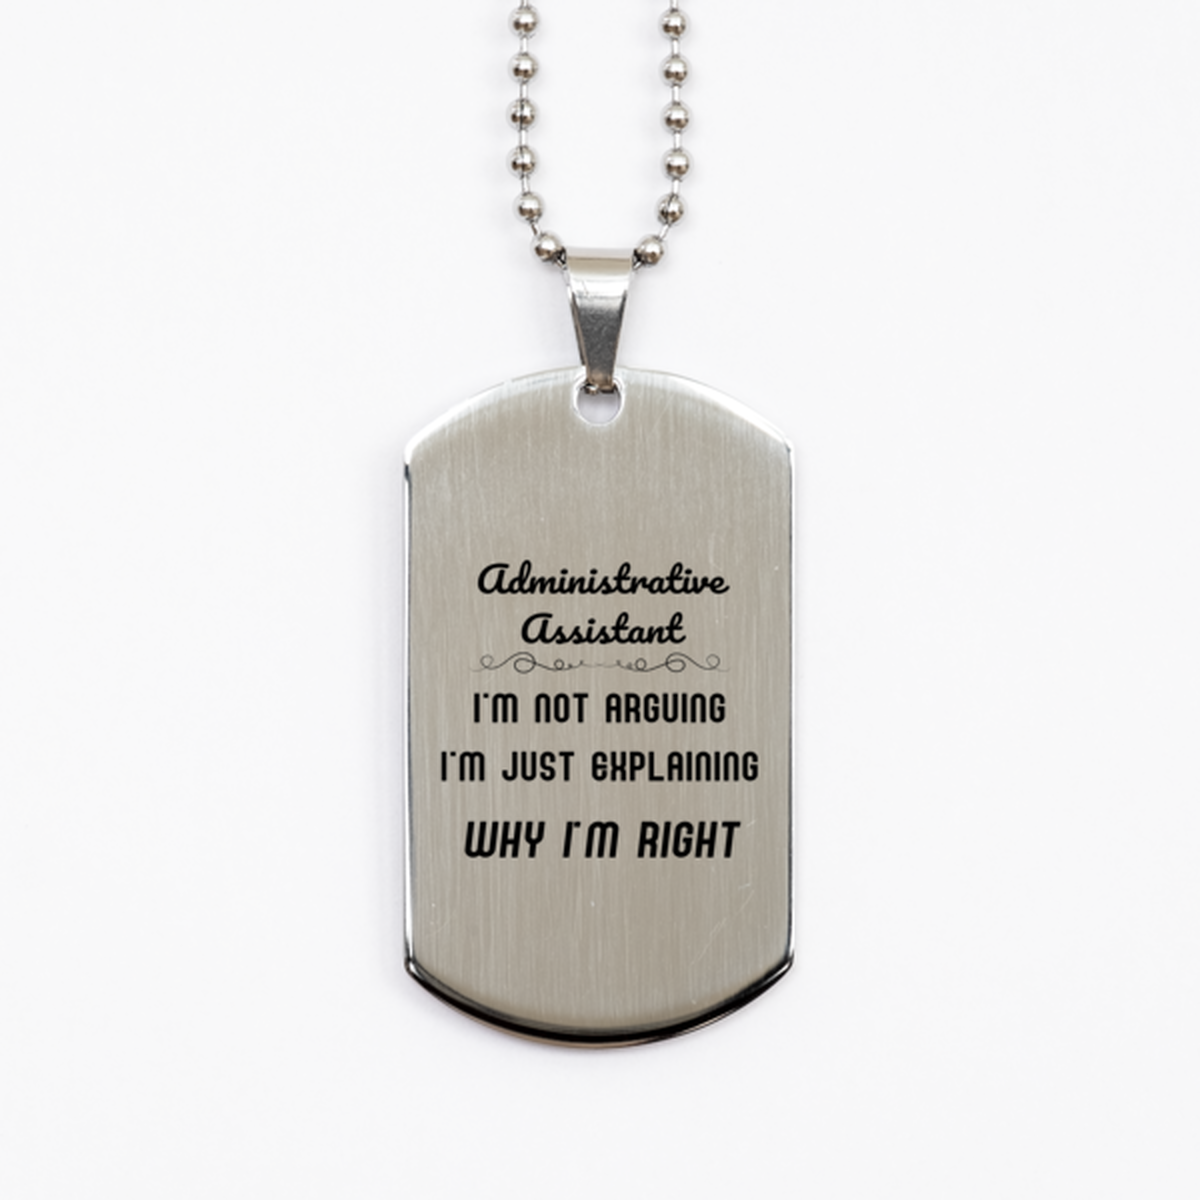 Administrative Assistant I'm not Arguing. I'm Just Explaining Why I'm RIGHT Silver Dog Tag, Funny Saying Quote Administrative Assistant Gifts For Administrative Assistant Graduation Birthday Christmas Gifts for Men Women Coworker